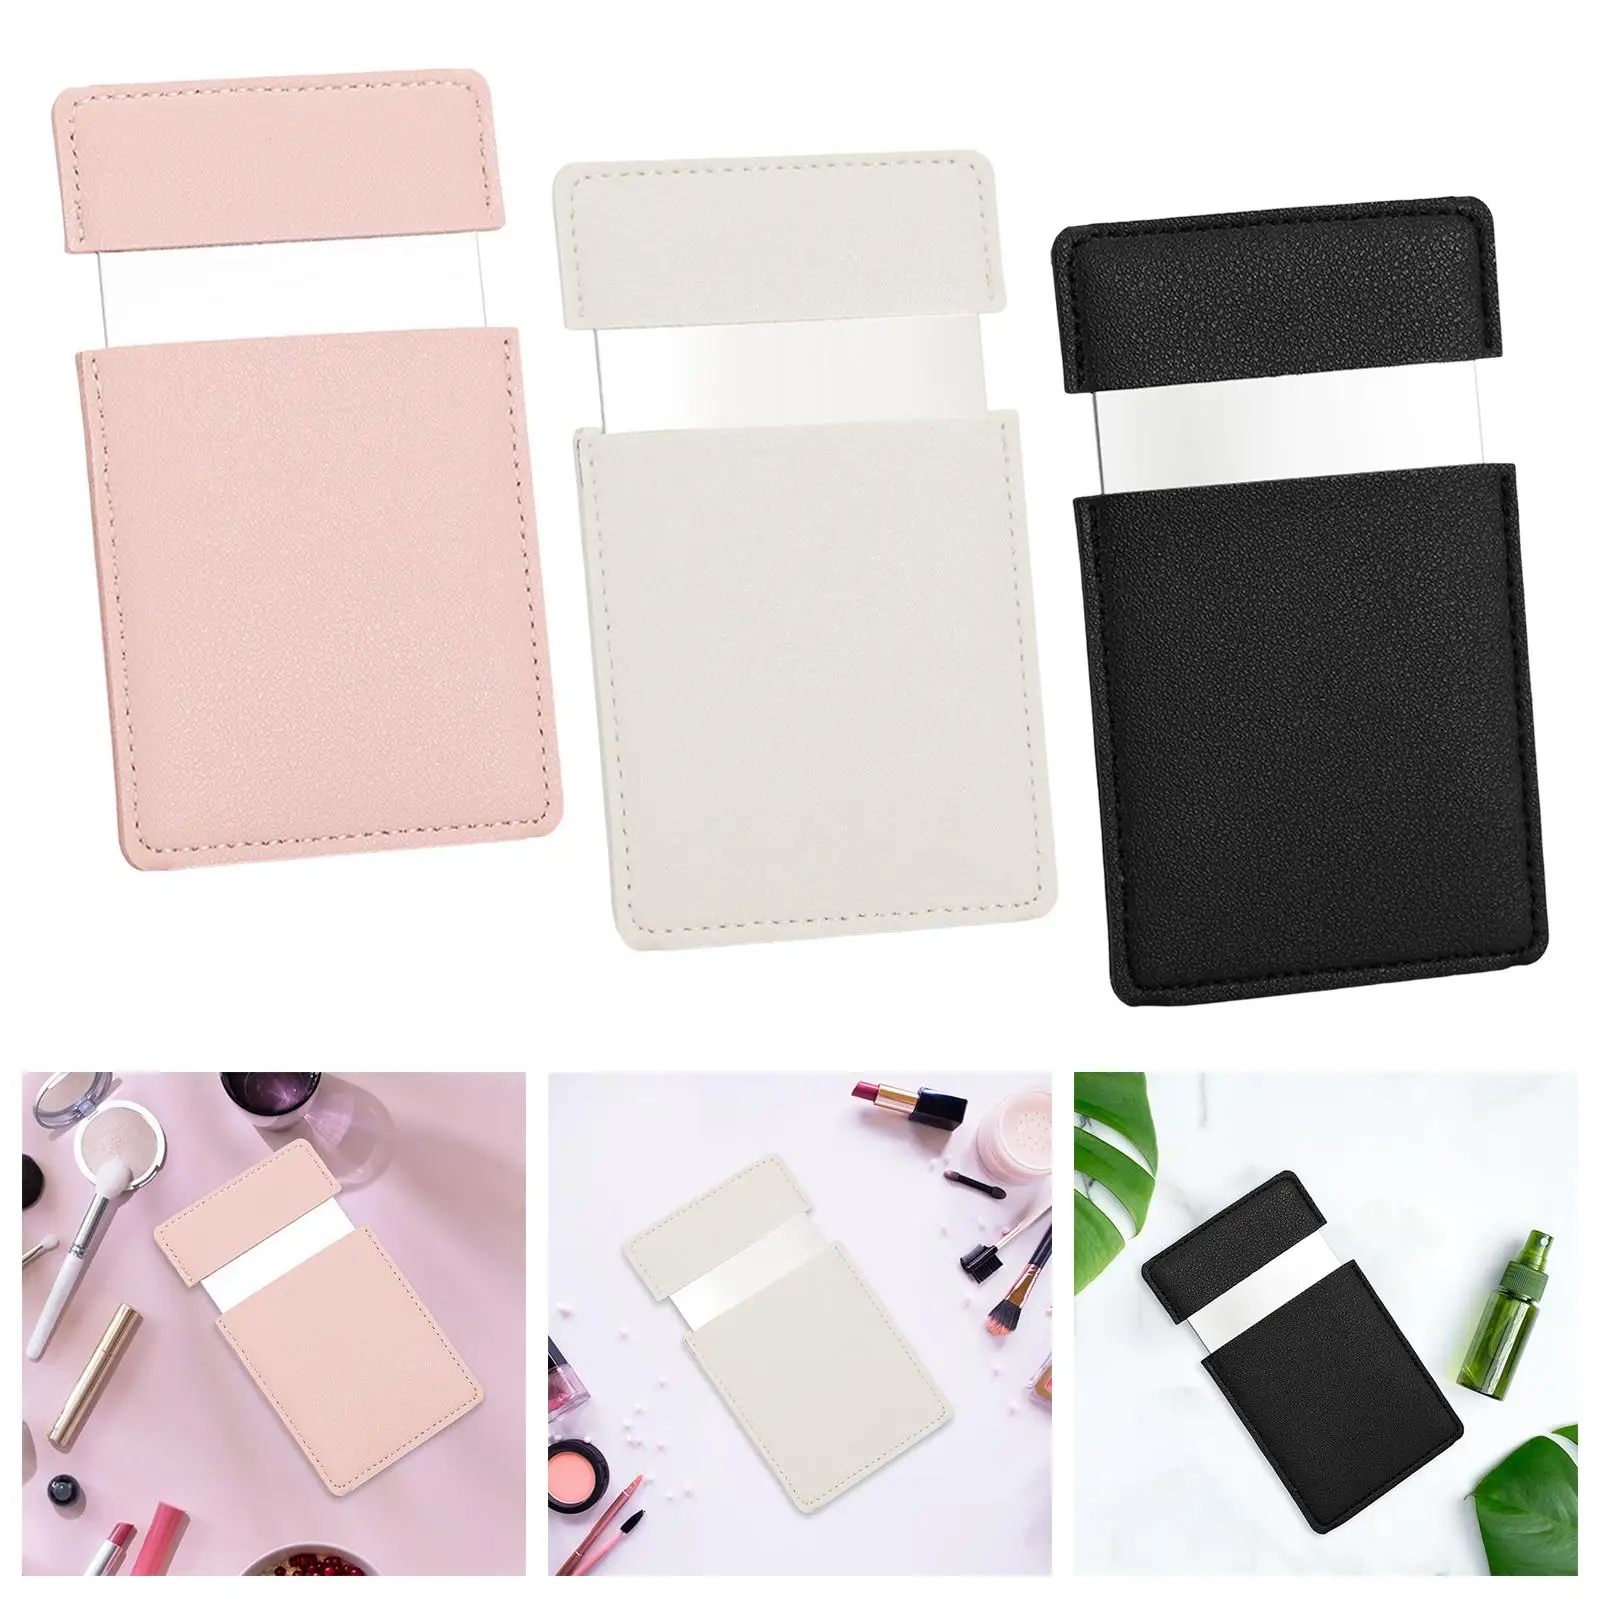 Handheld Square Mini Makeup Mirror Travelling Unbreakable Camping Outdoor Travel Mirror Shaving Mirrors with PU Leather Cover